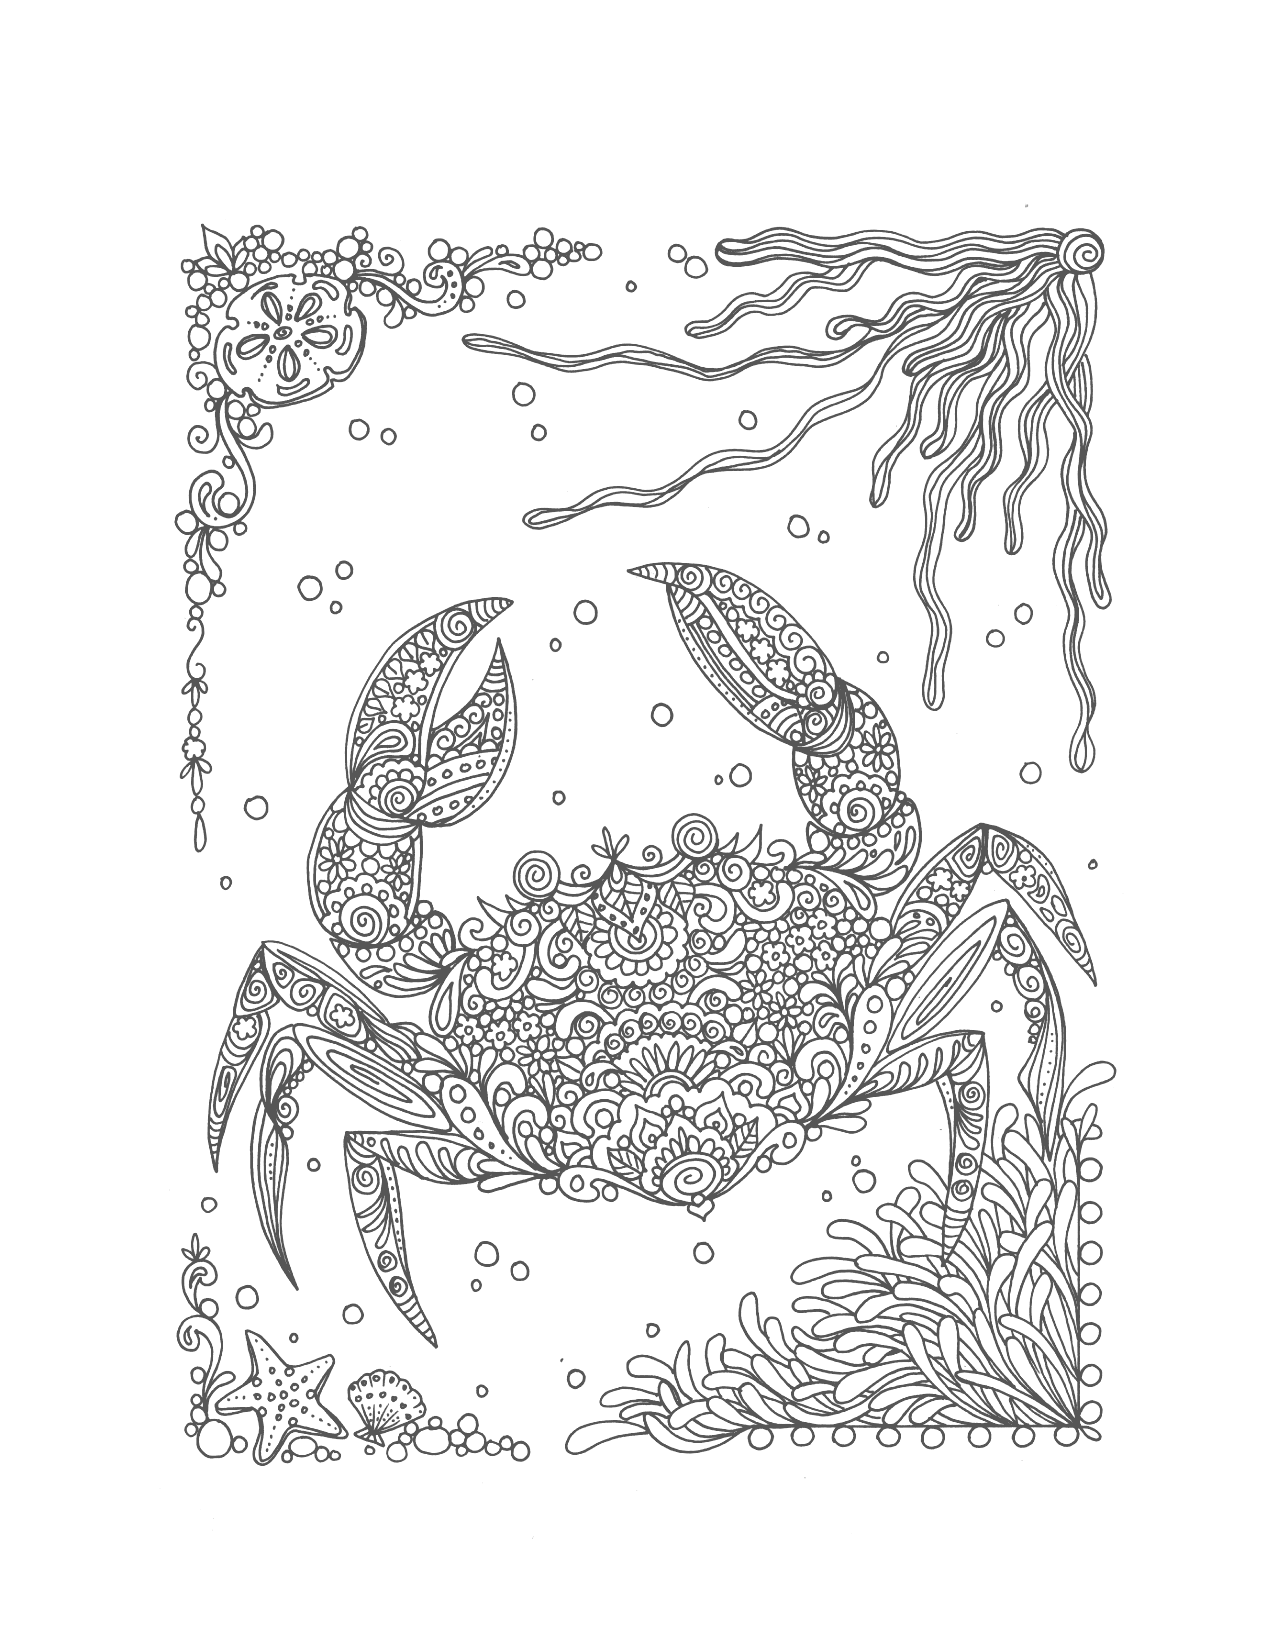 Ocean Crab Coloring Page For Adults